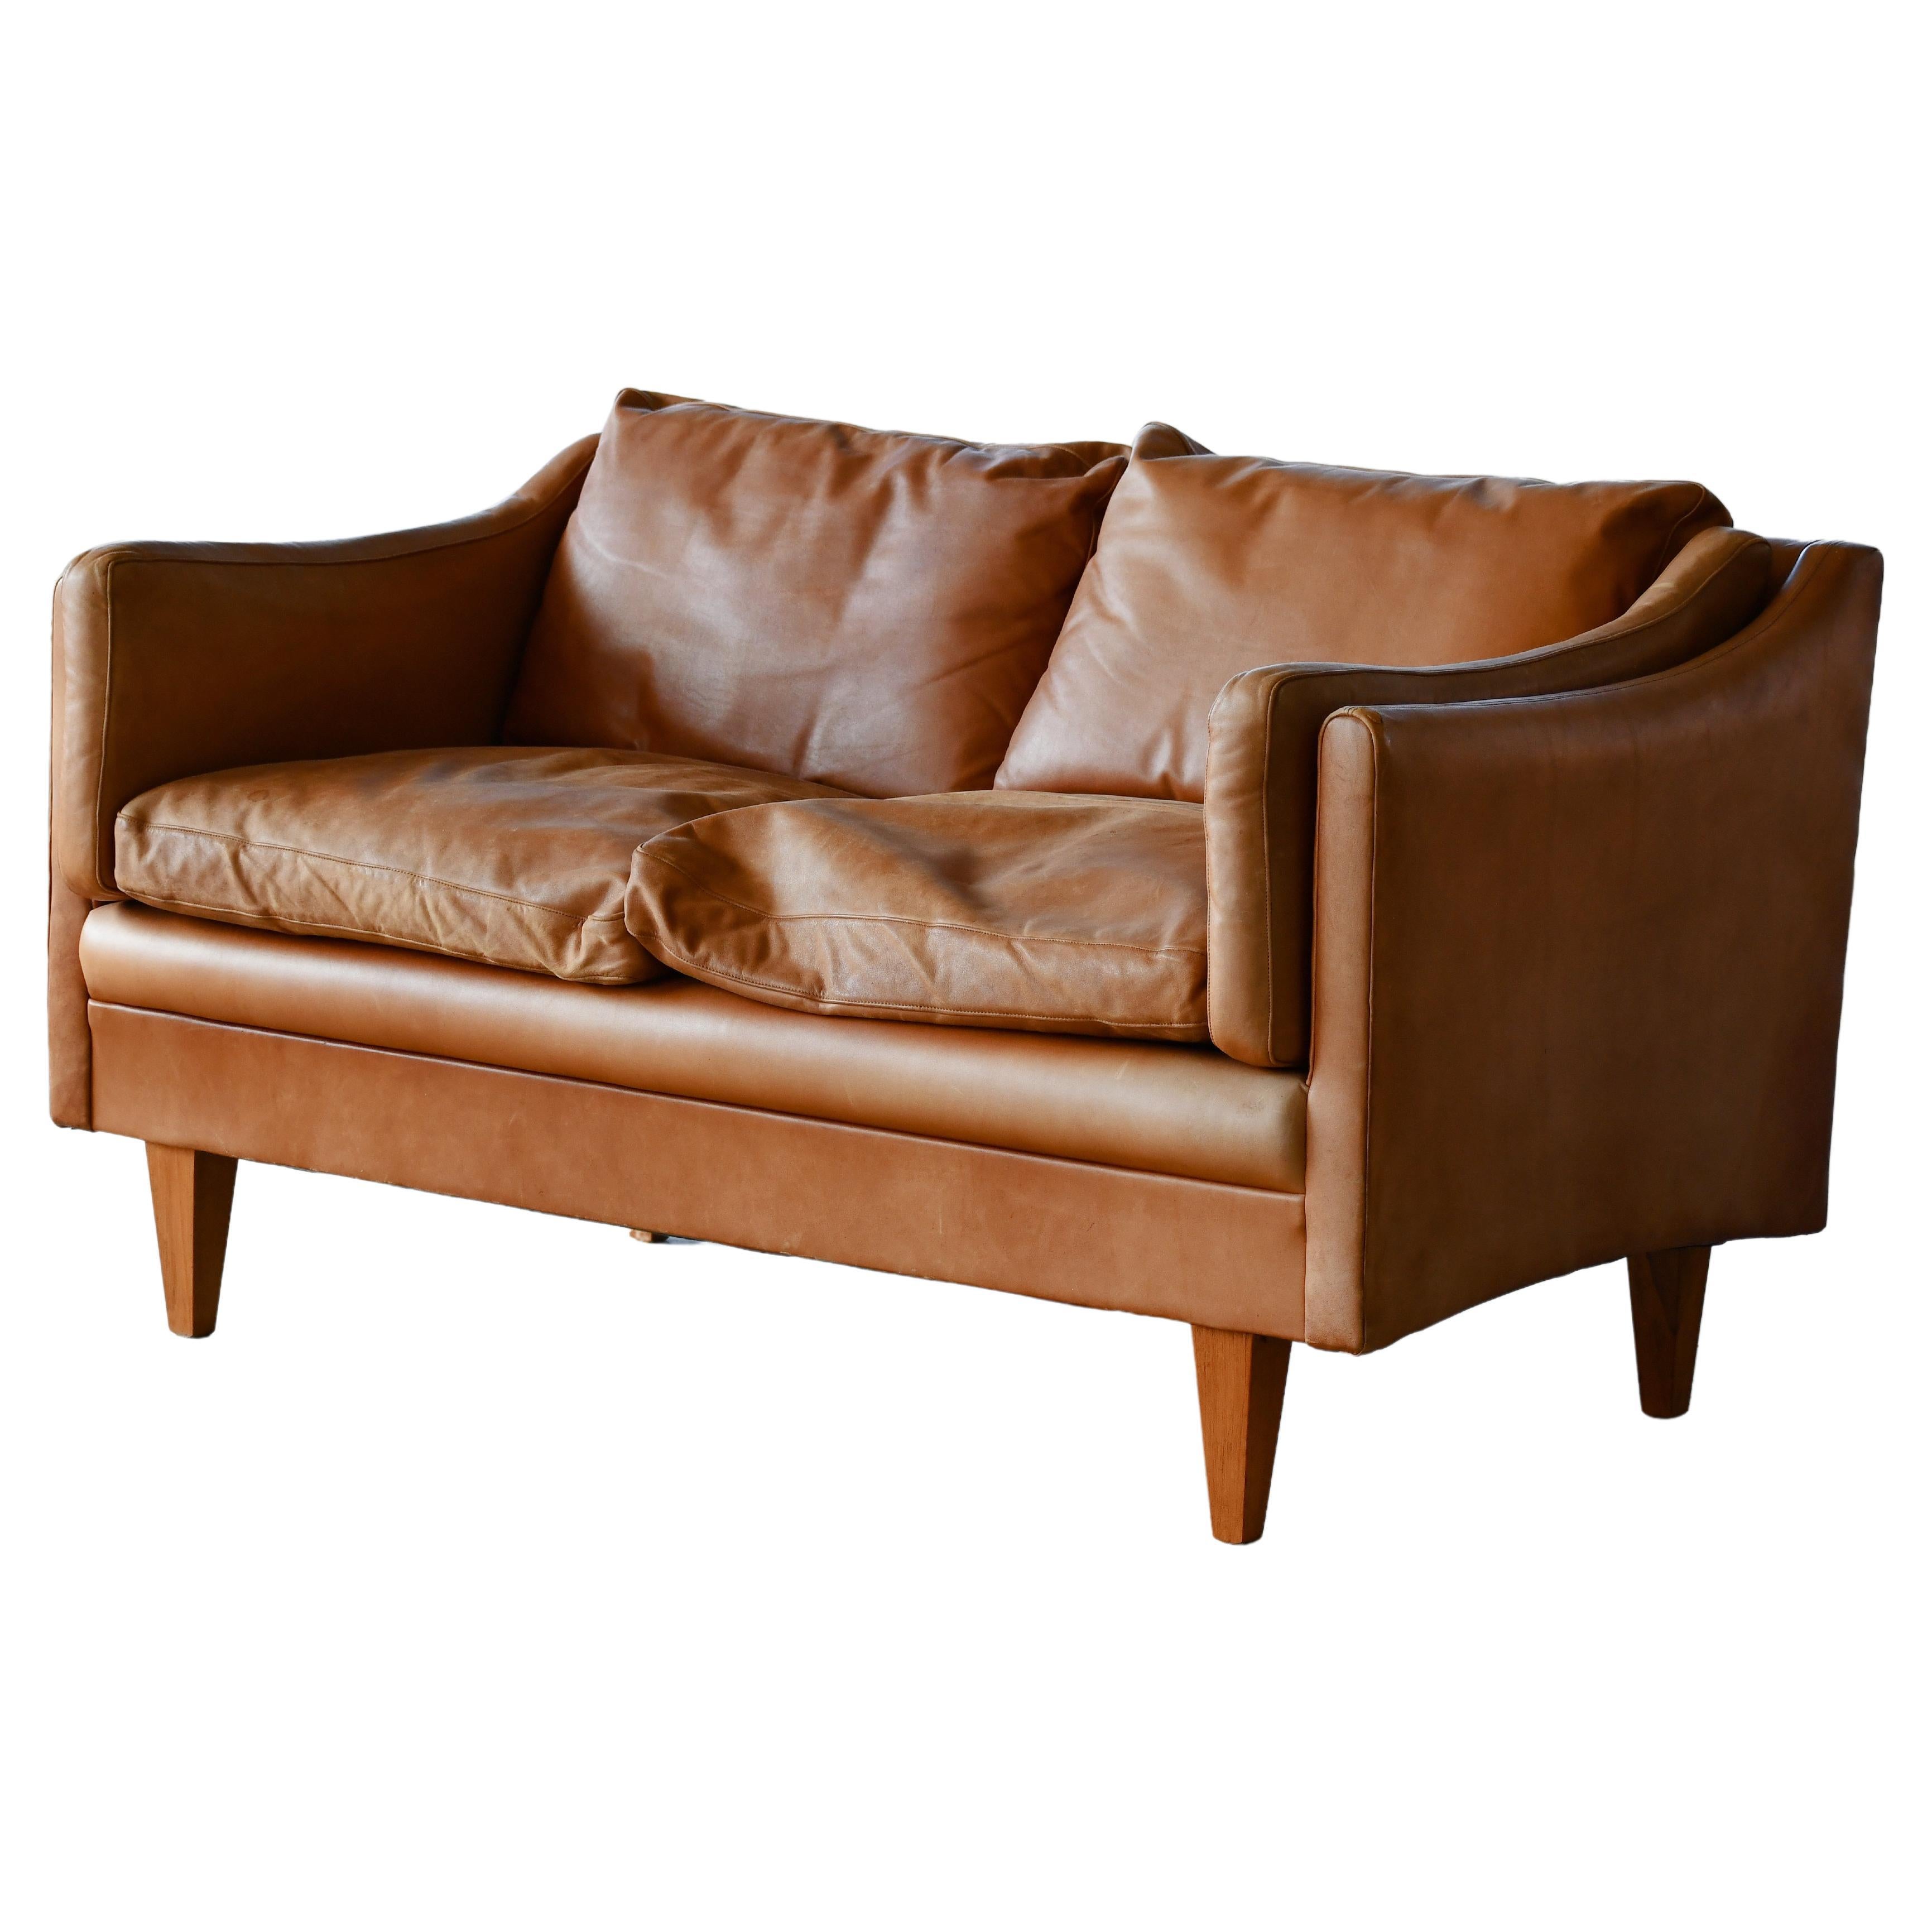 Classic Danish 1960s Two-Seat Sofa or Loveseat in Cognac Colored Leather  For Sale